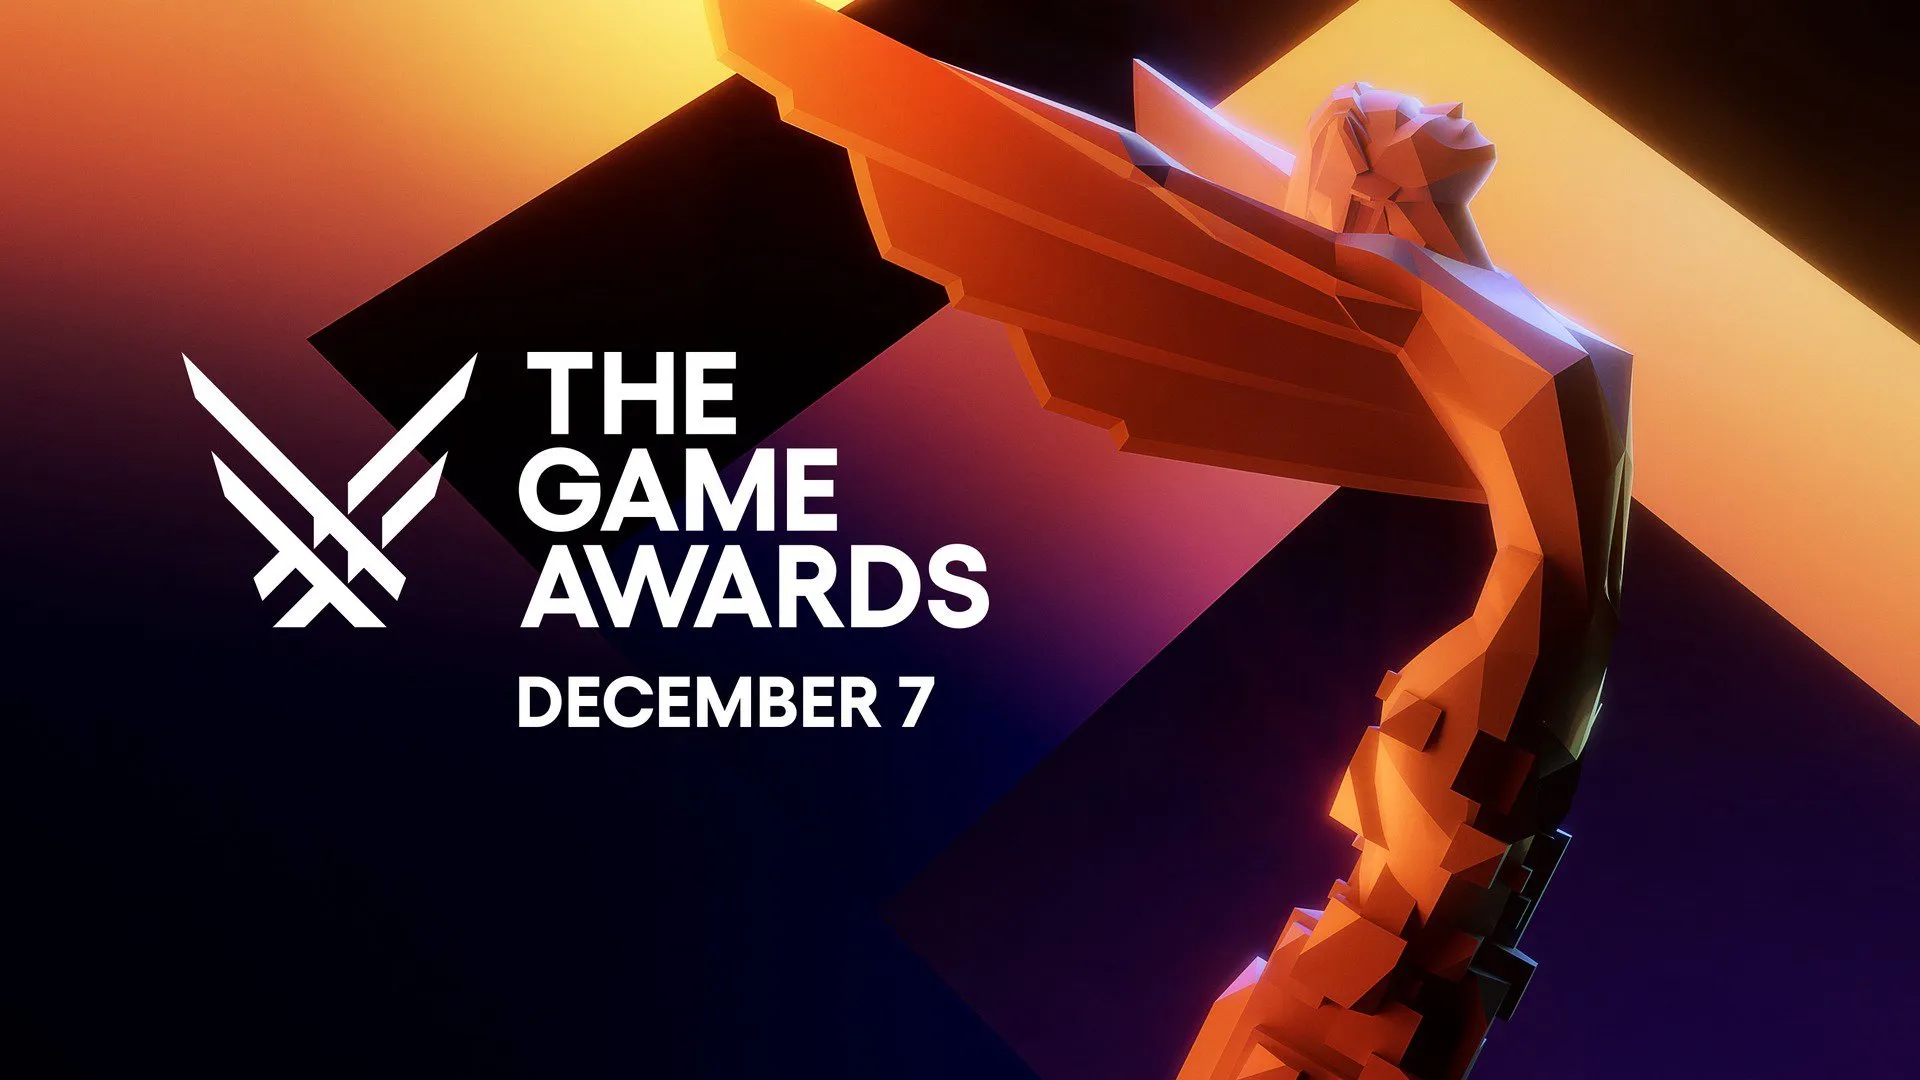 Here are The Game Awards 2020 winners